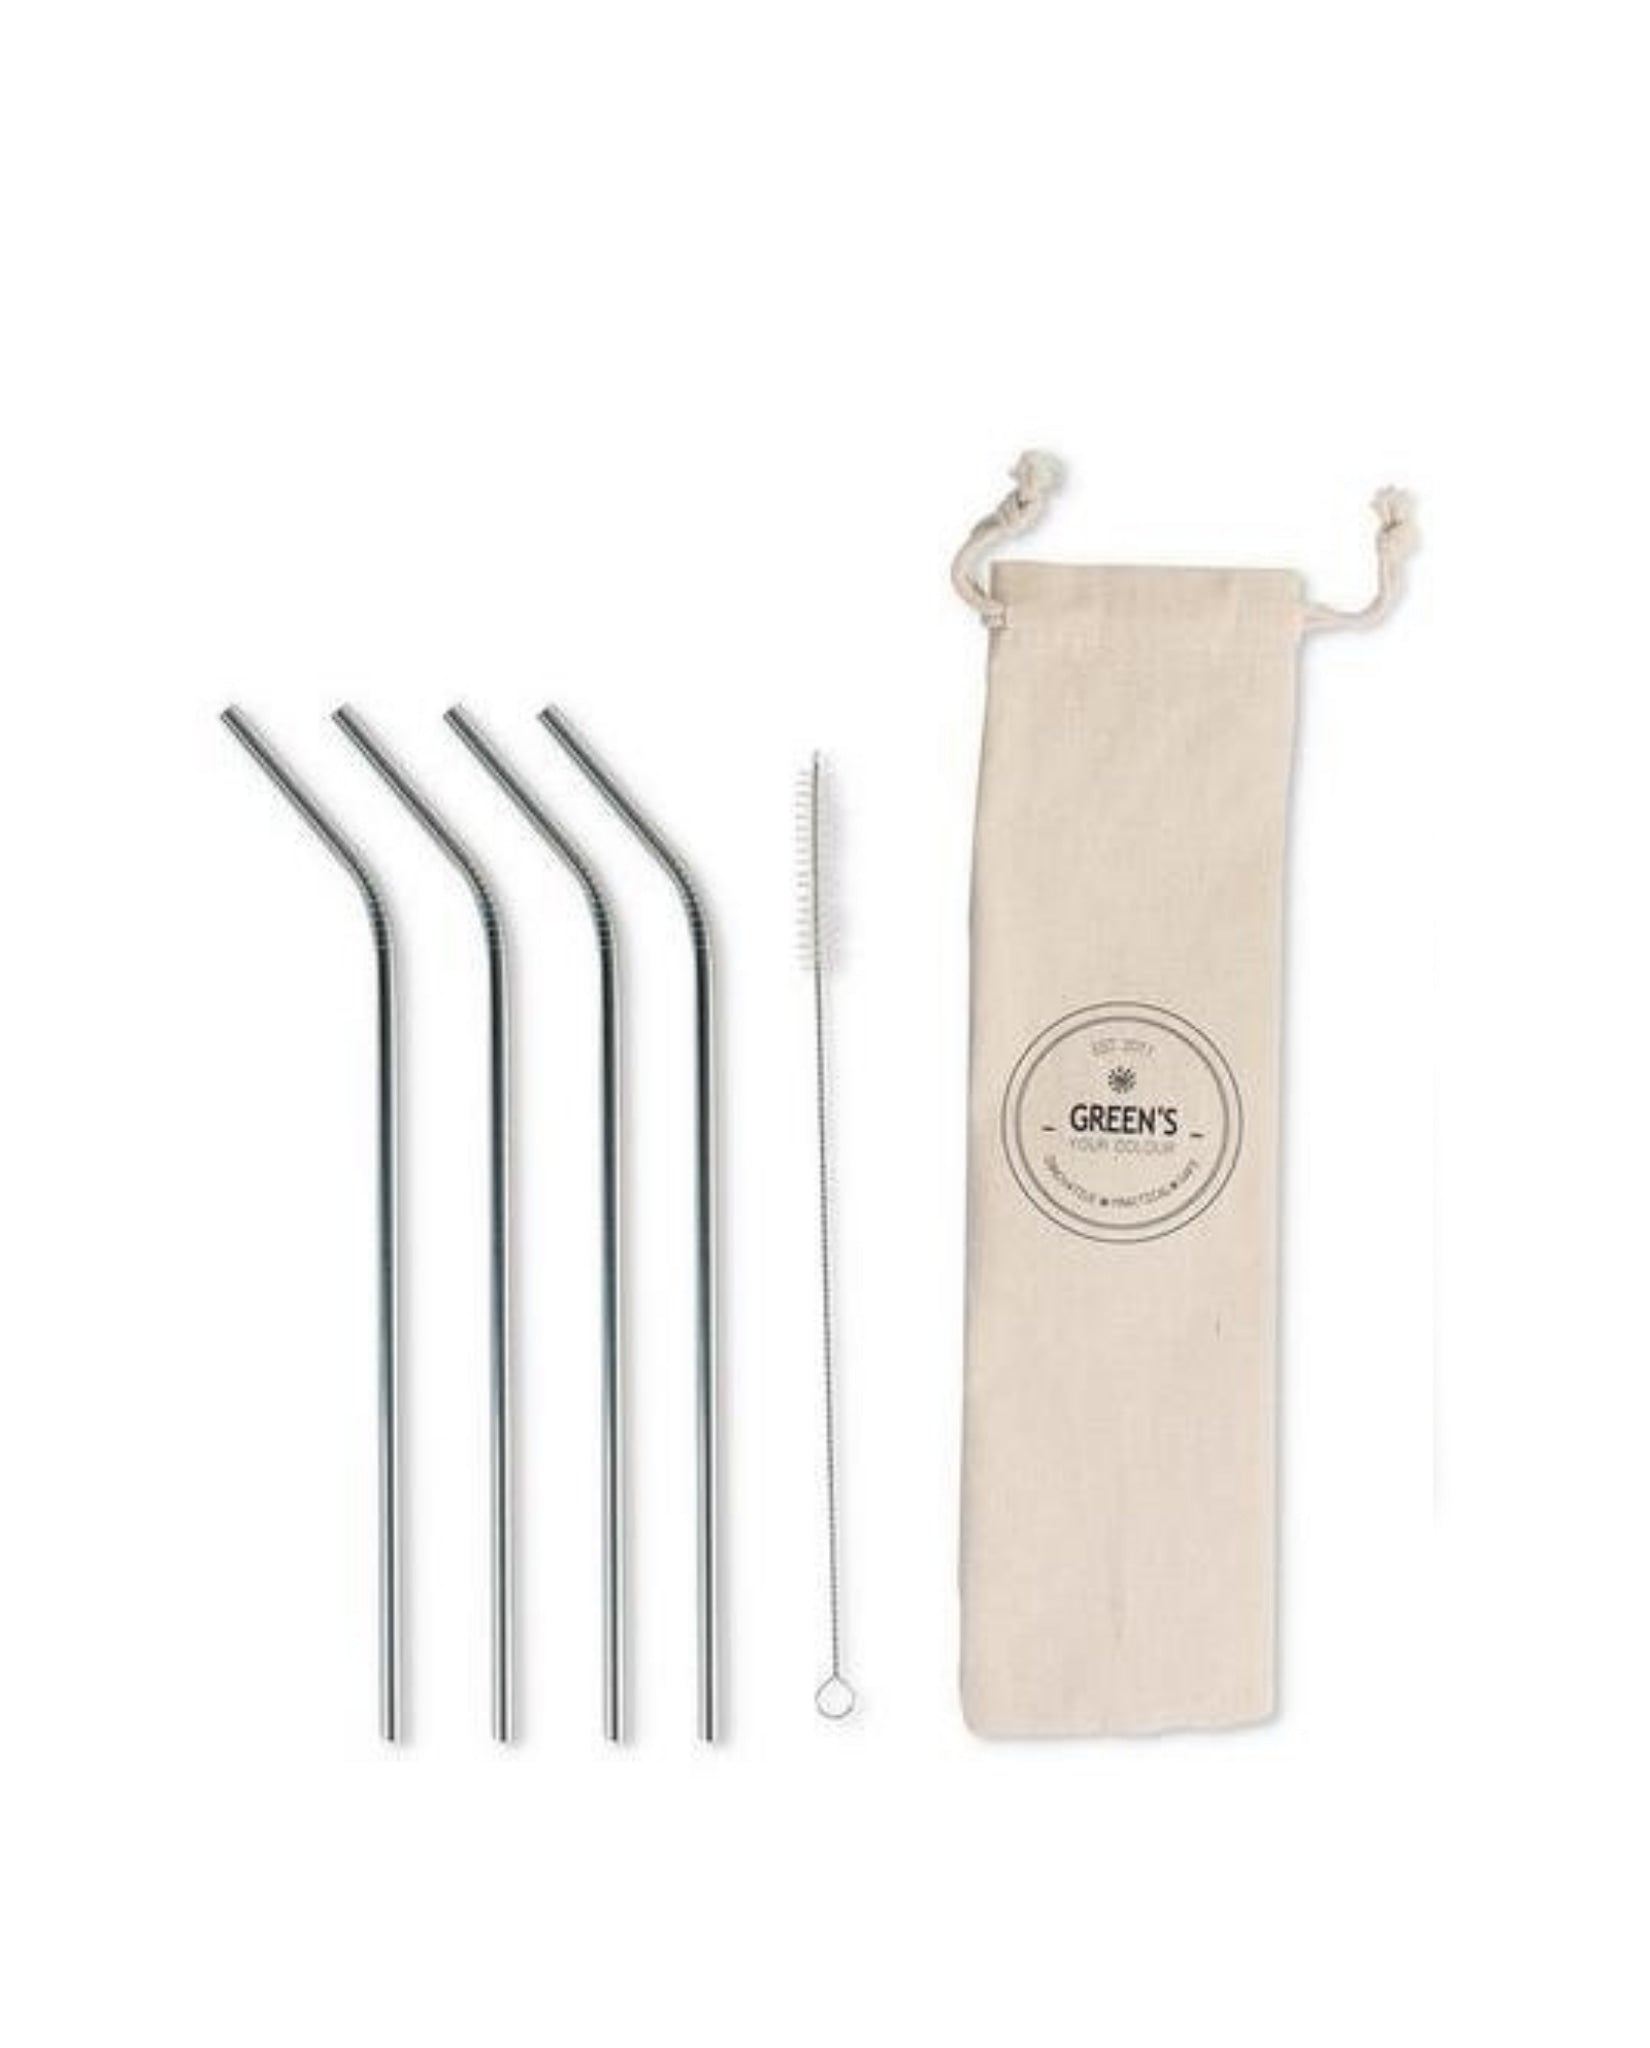 Stainless Steel Straw Set 10"